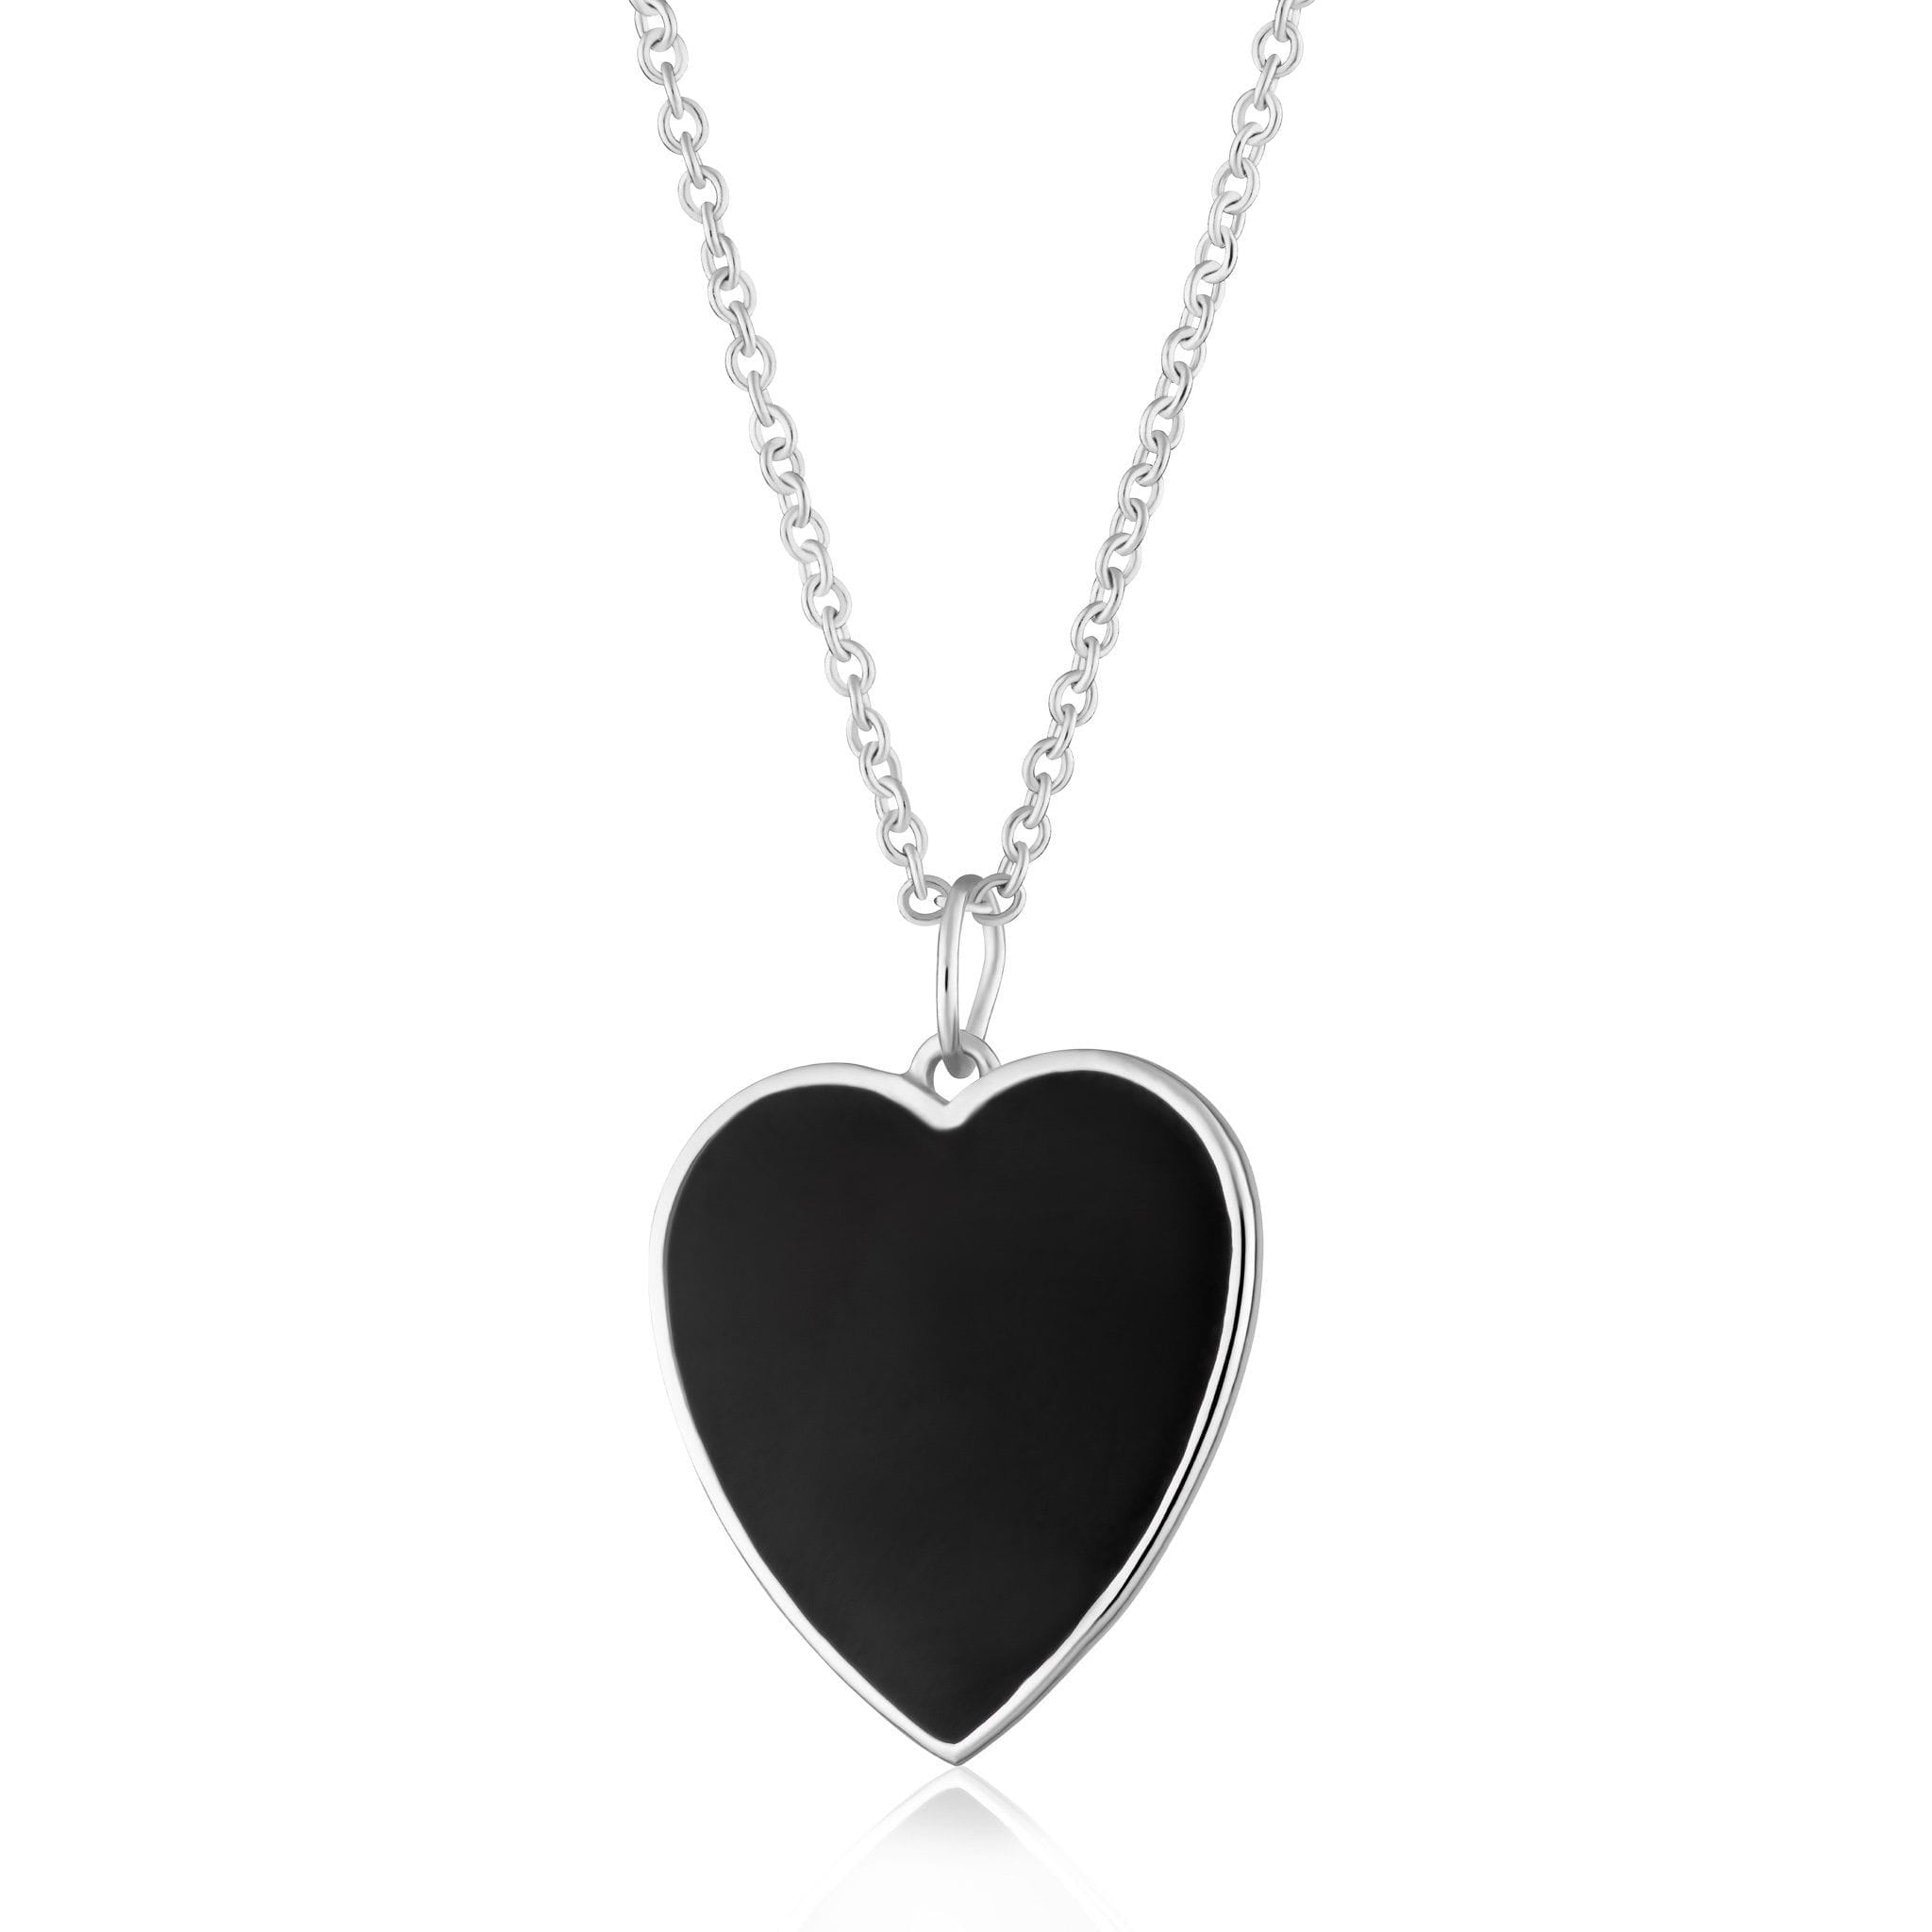  Black Heart Necklace with Slider Clasp - by Scream Pretty